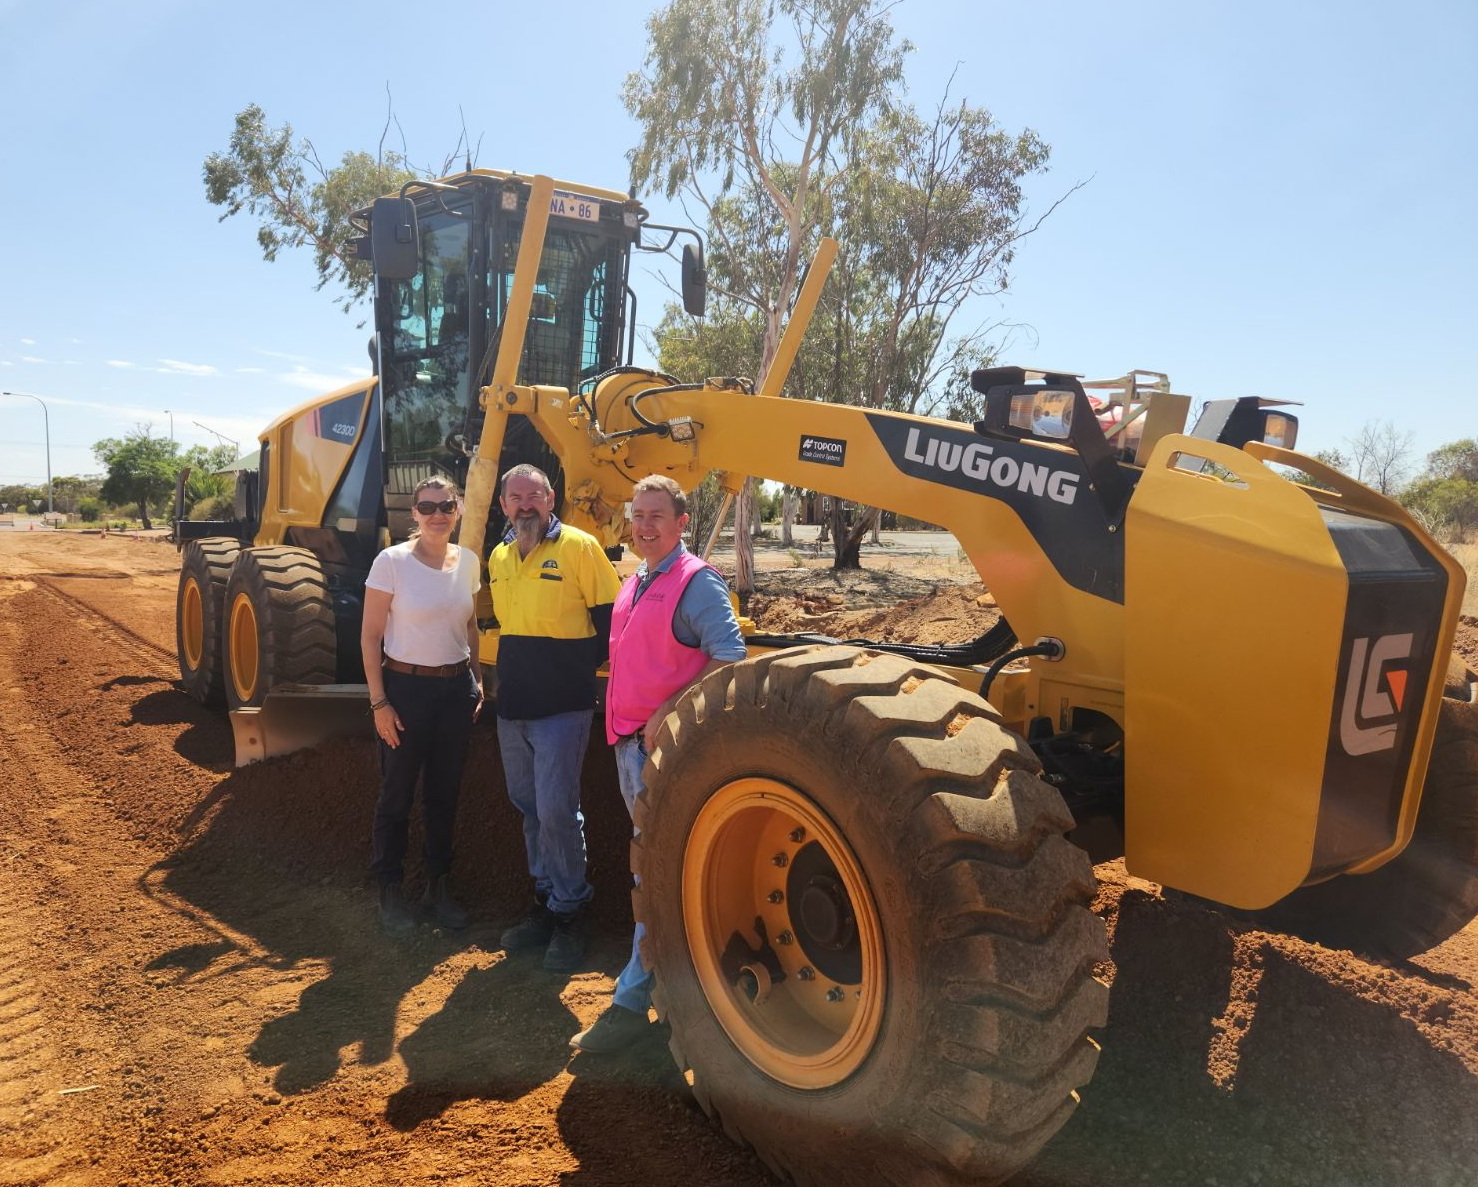 Photo caption 1 & 2: President of the Nungarin Shire in WA, Pippa de Lacy, Manager Works and Services Dave Nayda and Chief Executive Officer Ric Halse with the shire’s LiuGong 4230D motor grader. The shire was one of the first in the State to add a LiuGong grader to its fleet after earlier purchasing a LiuGong 856H wheeled loader, both for significantly lower capital investment compared with other major brands.